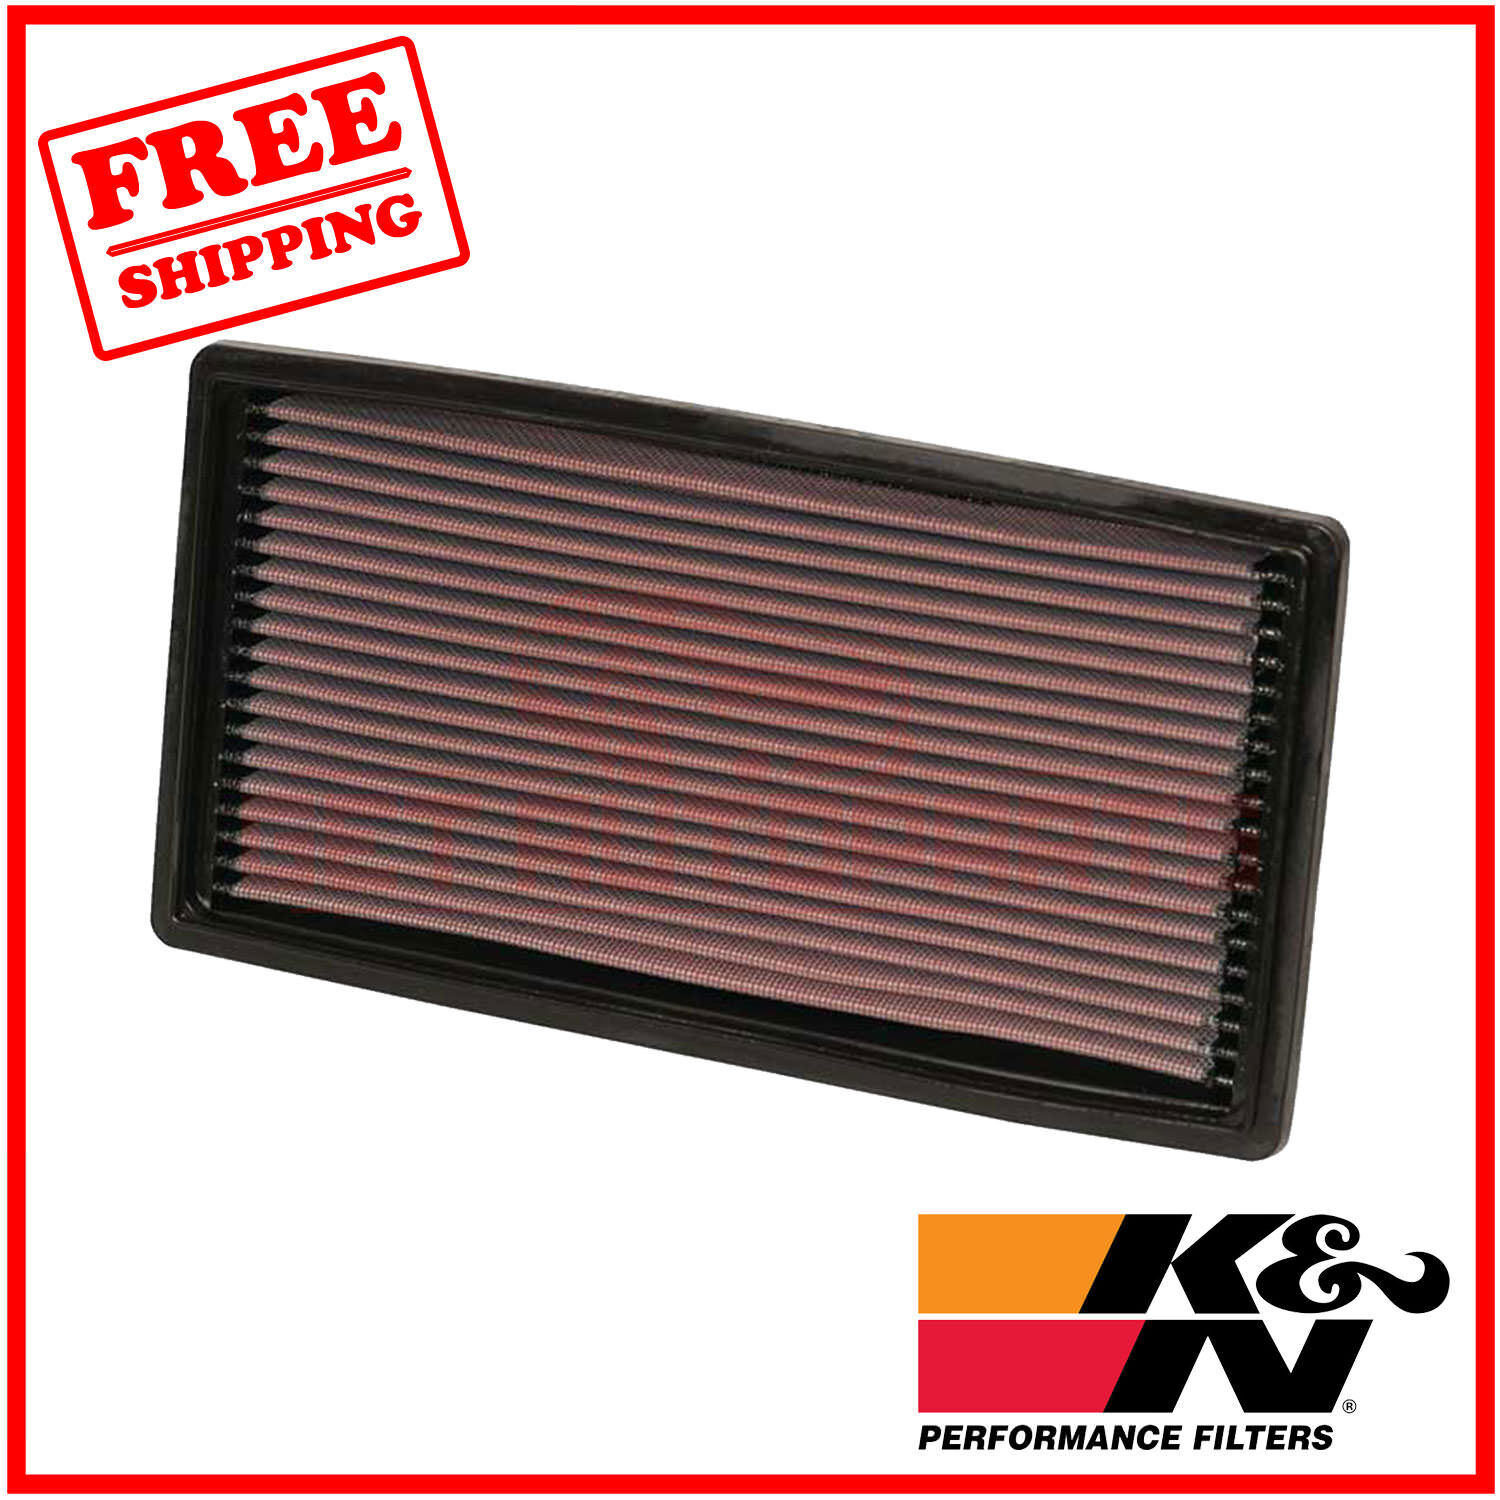 K&N Replacement Air Filter for Chevrolet S10 Blazer 1992-1994